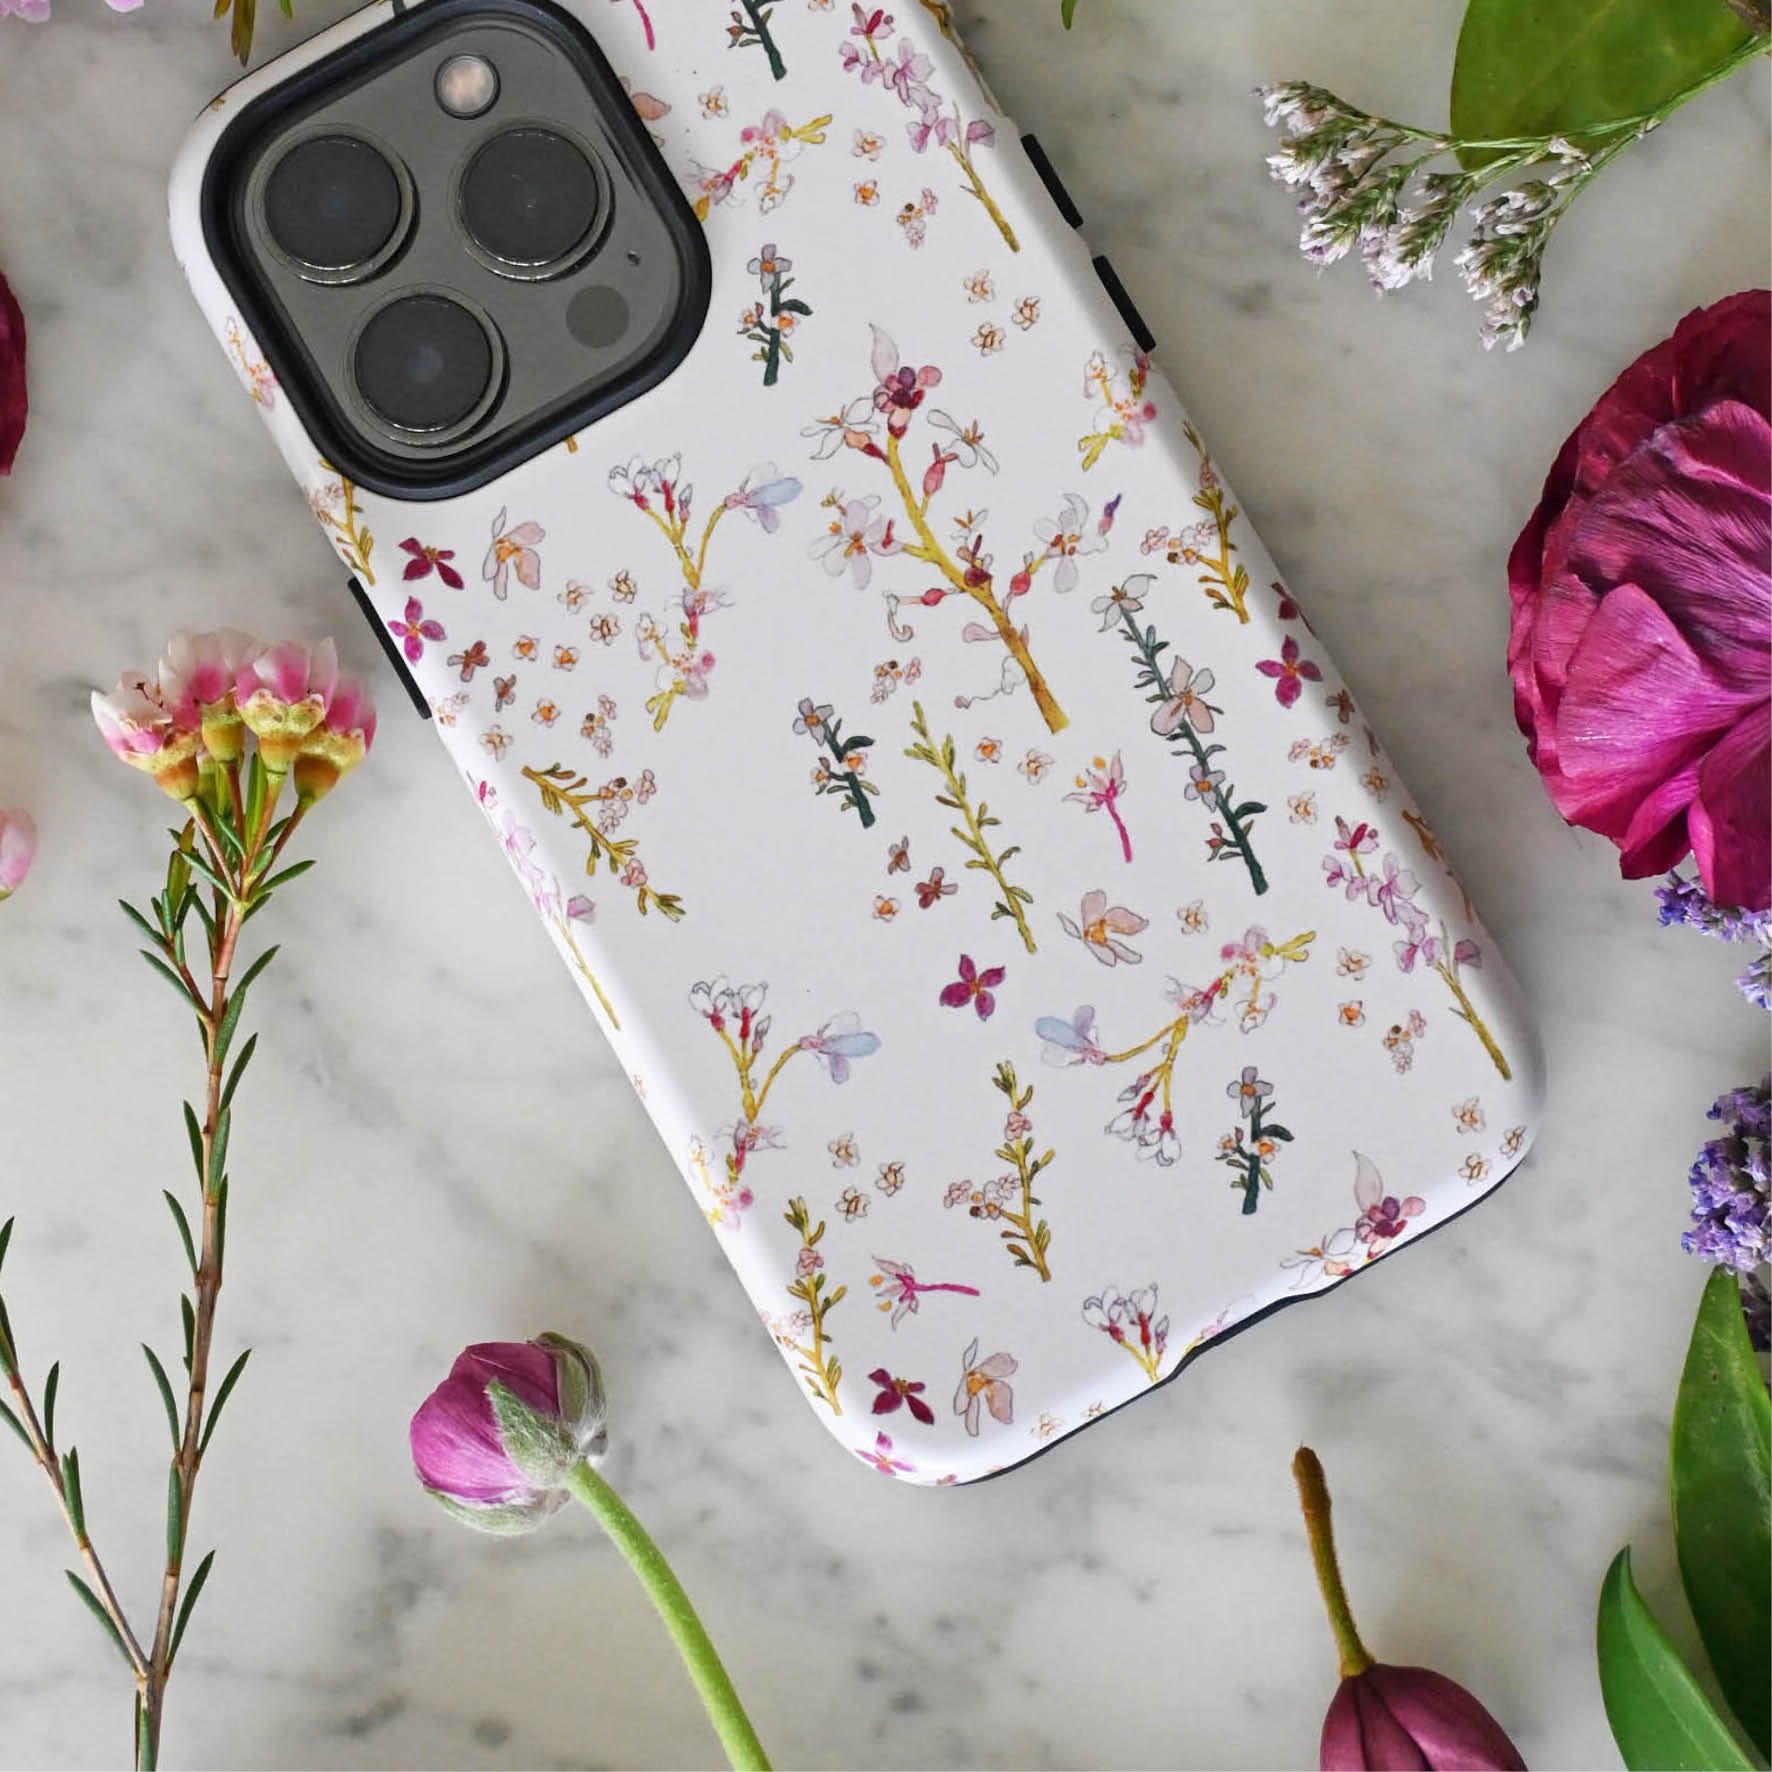 josephine-floral-phone-cover-watercolour-flowers.jpg